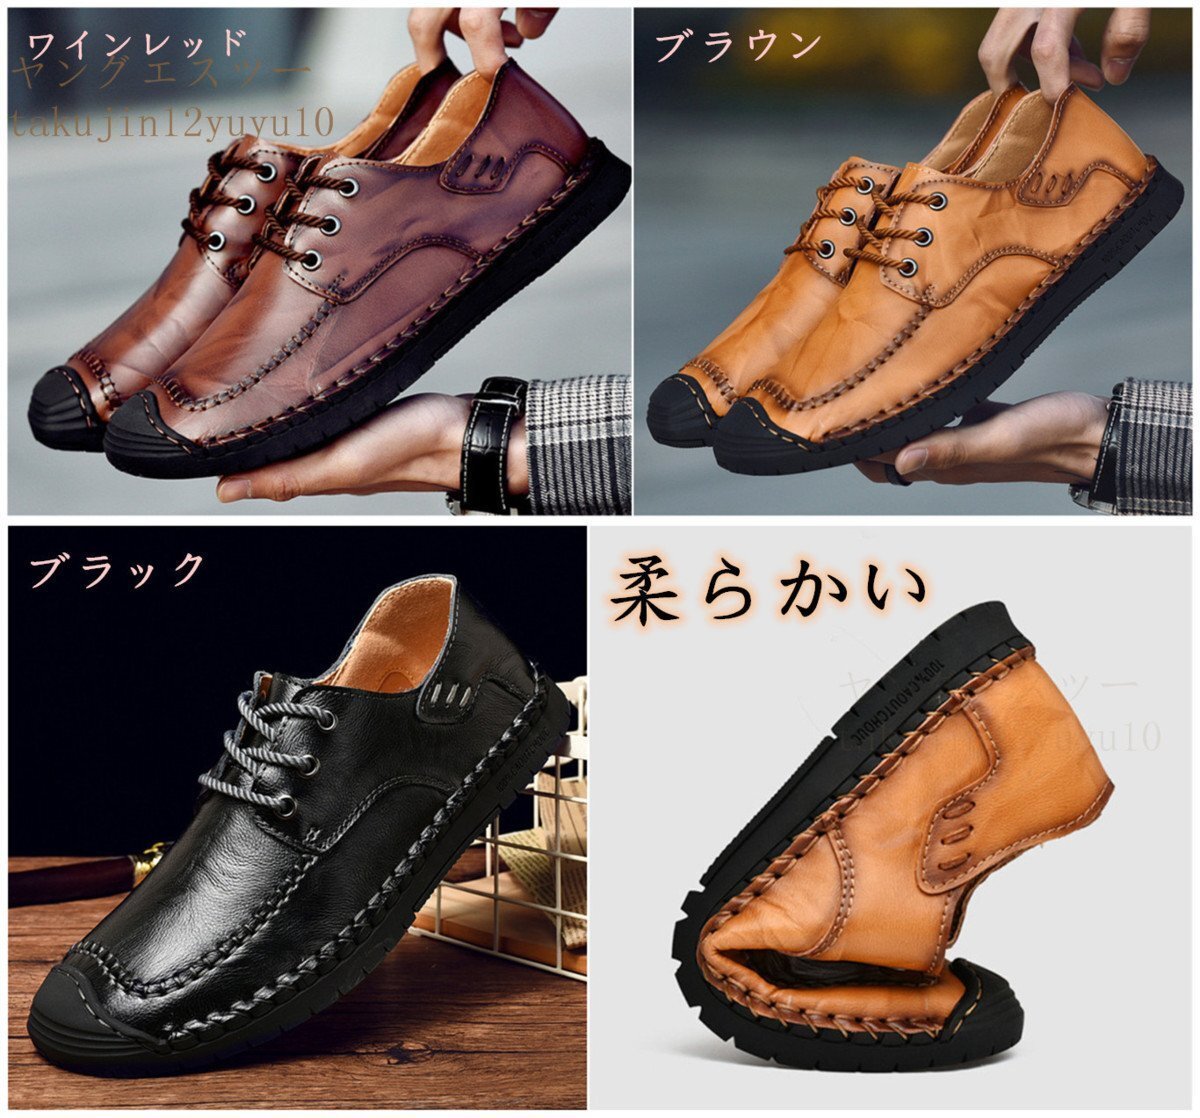  walking shoes original leather men's shoes new goods sneakers cow leather leather shoes ventilation driving Loafer slip-on shoes 24.5cm